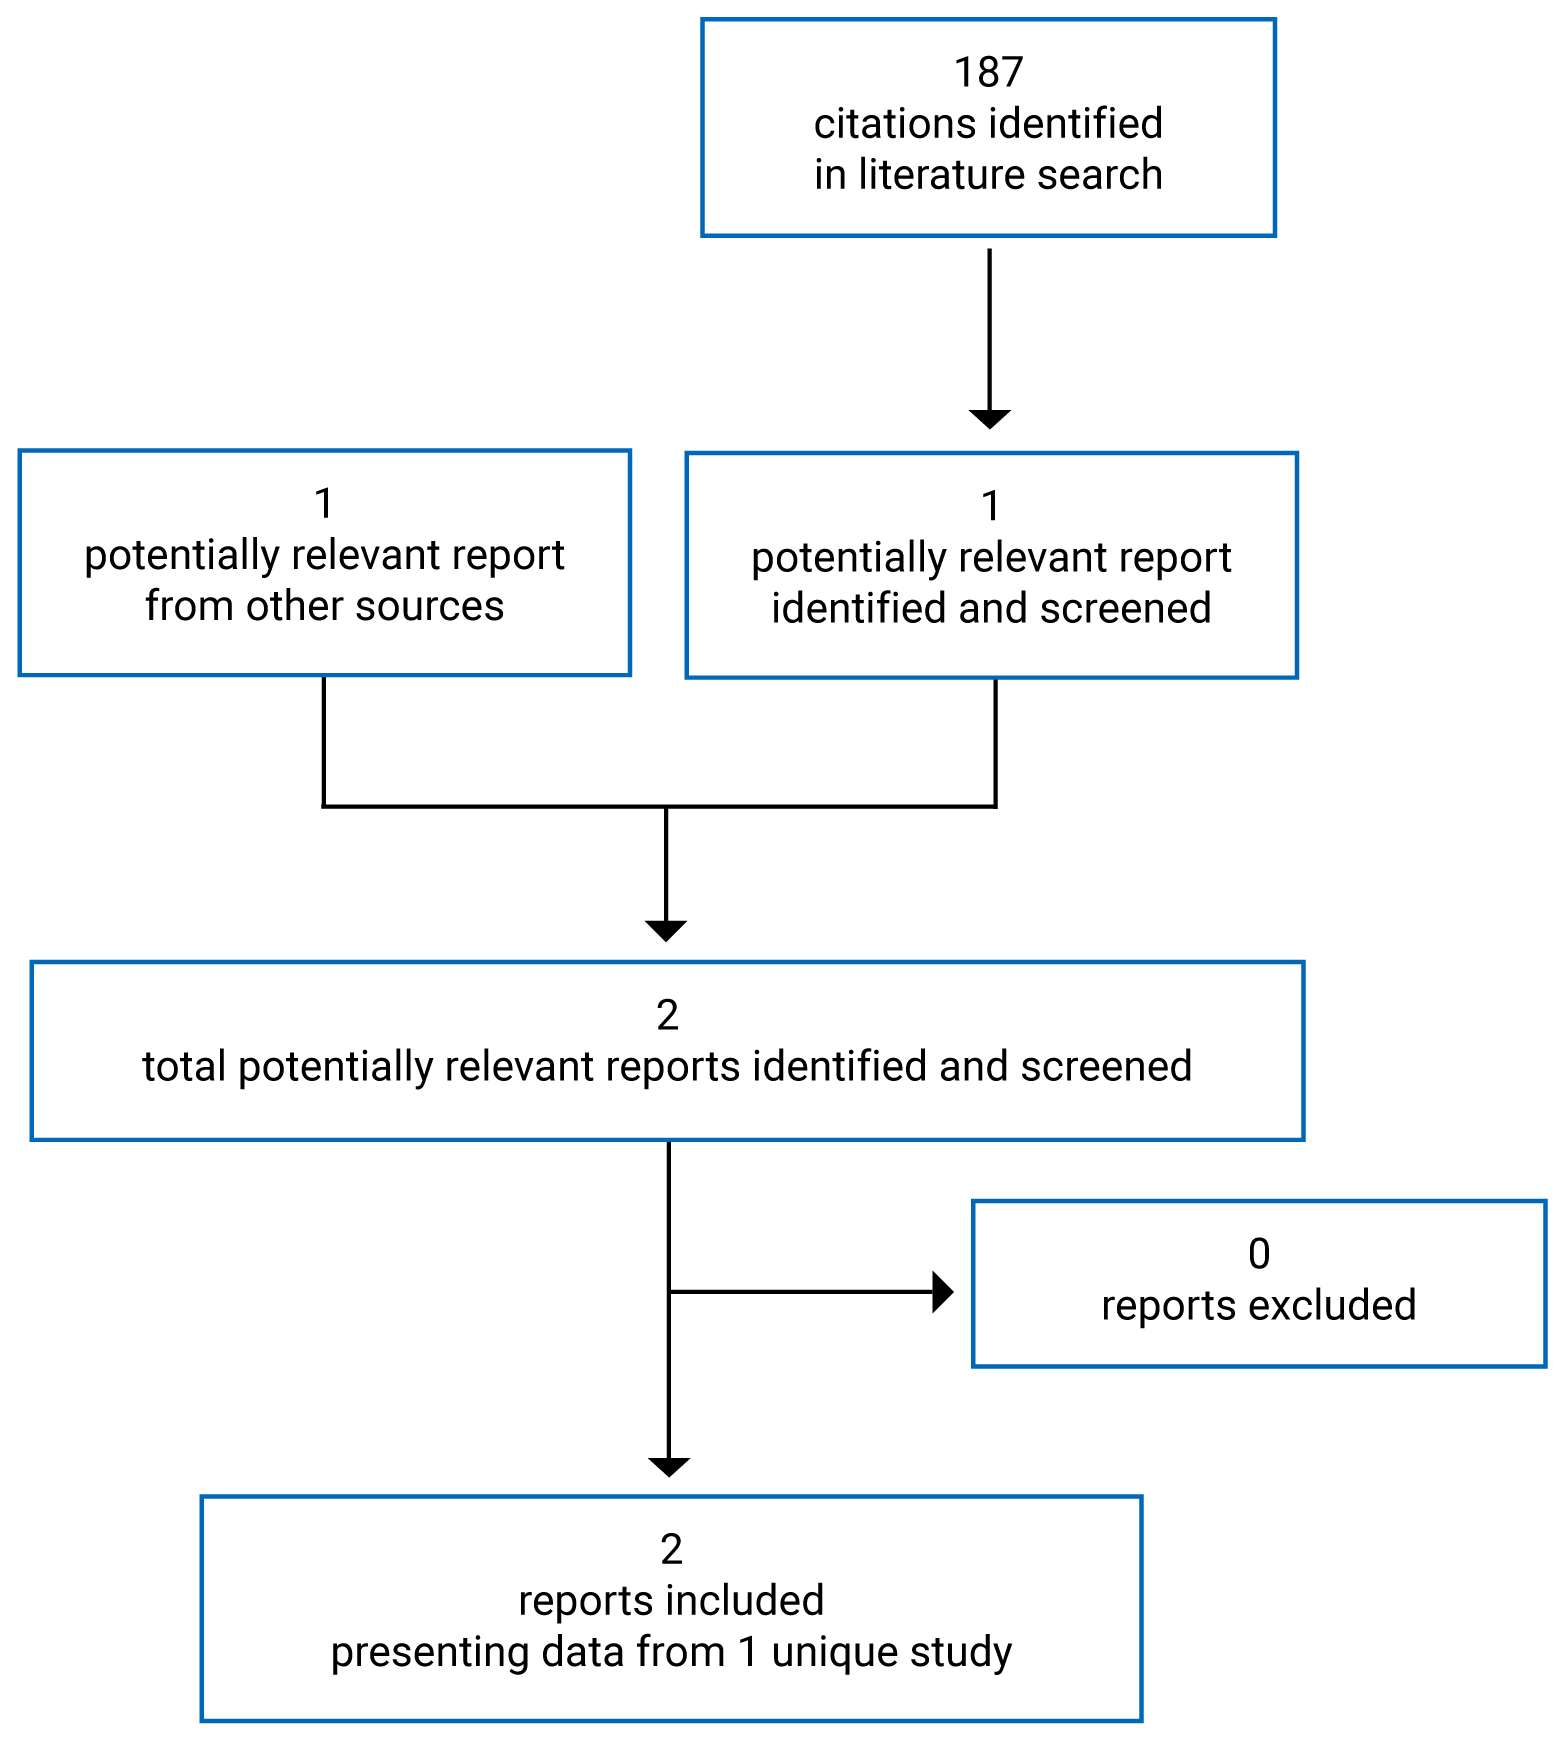 187 citations were identified in the literature search, of which 1 was potentially relevant. An additional report from the grey literature was potentially relevant. After full-text reports were reviewed, all 2 reports representing 1 unique study were included in the systematic review section.